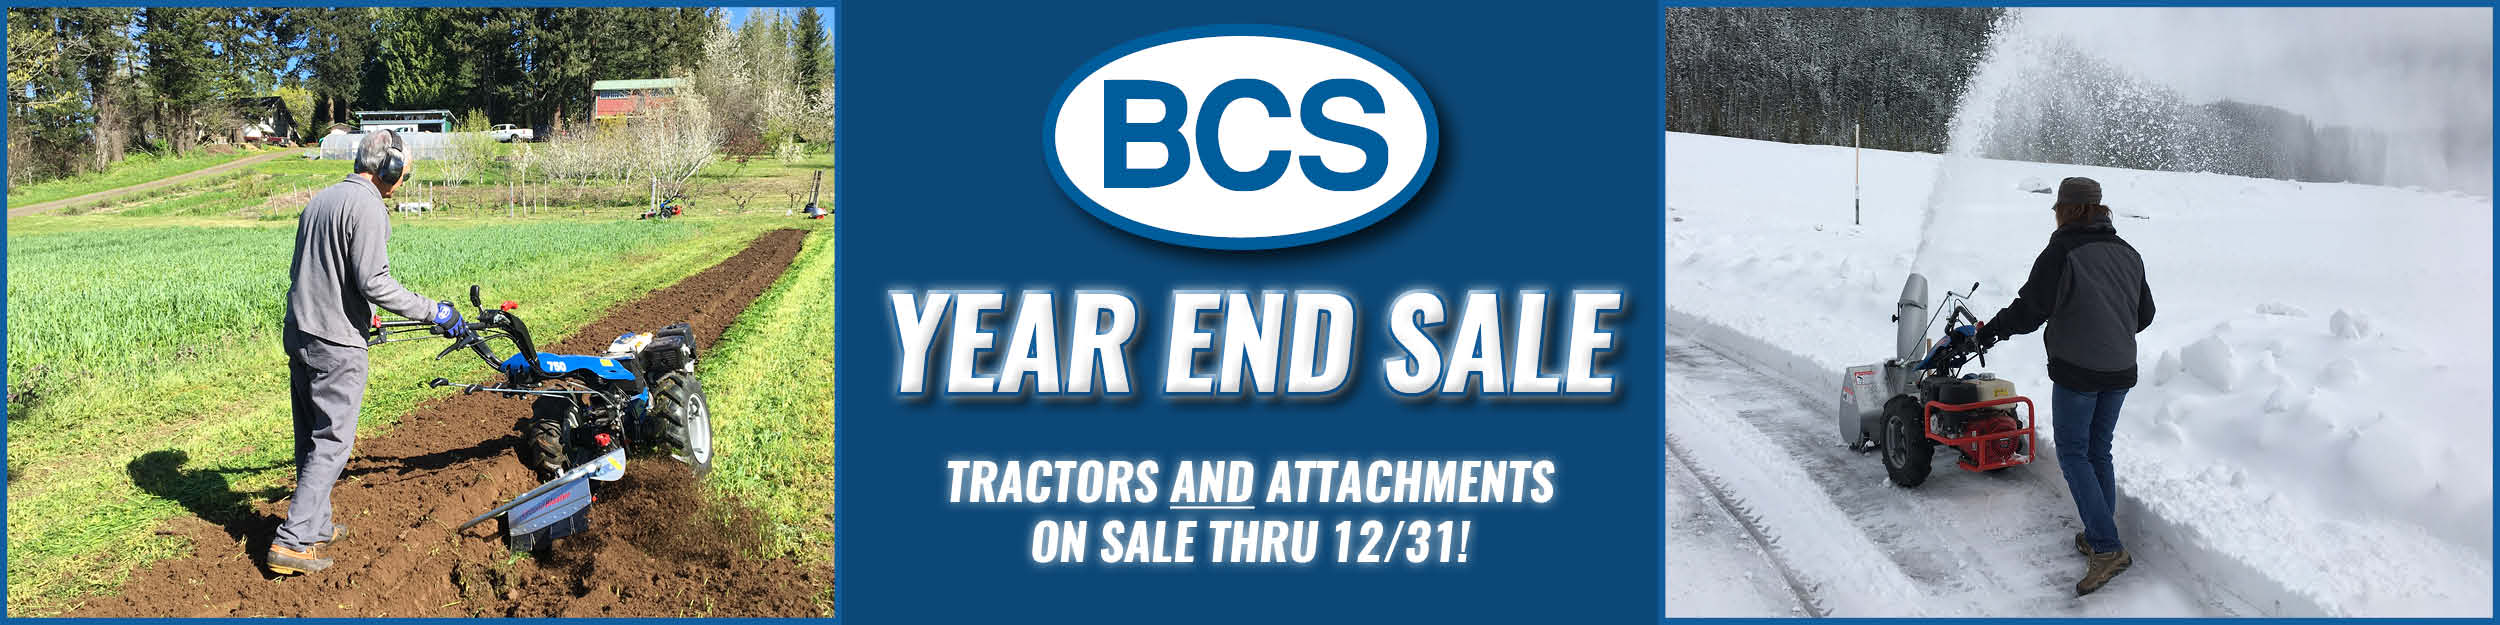 Time is running out: the BCS Year End Sale ends 12/31